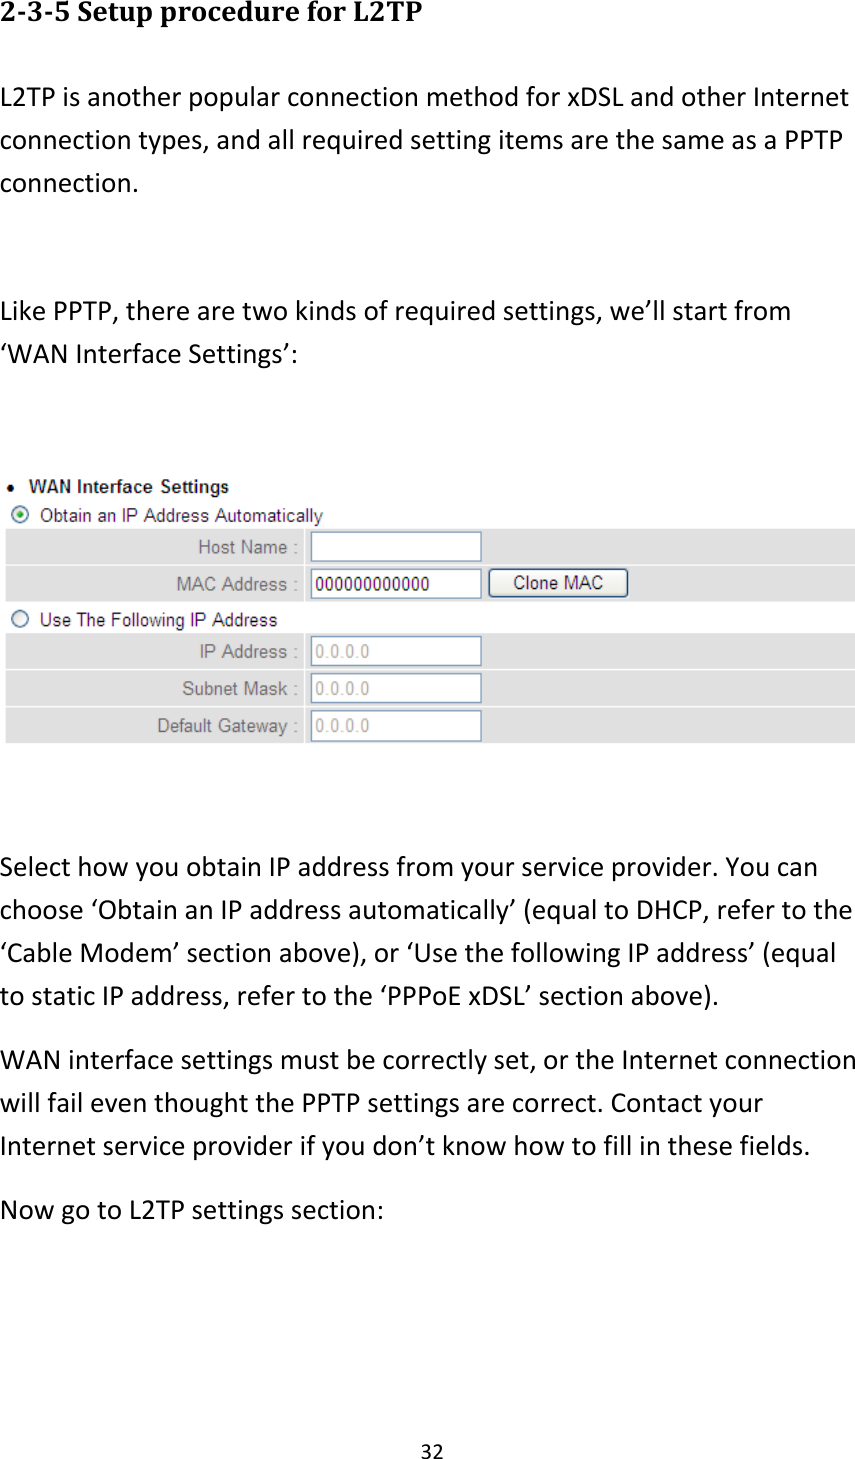 32 2-3-5 Setup procedure for L2TP  L2TP is another popular connection method for xDSL and other Internet connection types, and all required setting items are the same as a PPTP connection.  Like PPTP, there are two kinds of required settings, we’ll start from ‘WAN Interface Settings’:    Select how you obtain IP address from your service provider. You can choose ‘Obtain an IP address automatically’ (equal to DHCP, refer to the ‘Cable Modem’ section above), or ‘Use the following IP address’ (equal to static IP address, refer to the ‘PPPoE xDSL’ section above).   WAN interface settings must be correctly set, or the Internet connection will fail even thought the PPTP settings are correct. Contact your Internet service provider if you don’t know how to fill in these fields. Now go to L2TP settings section:  